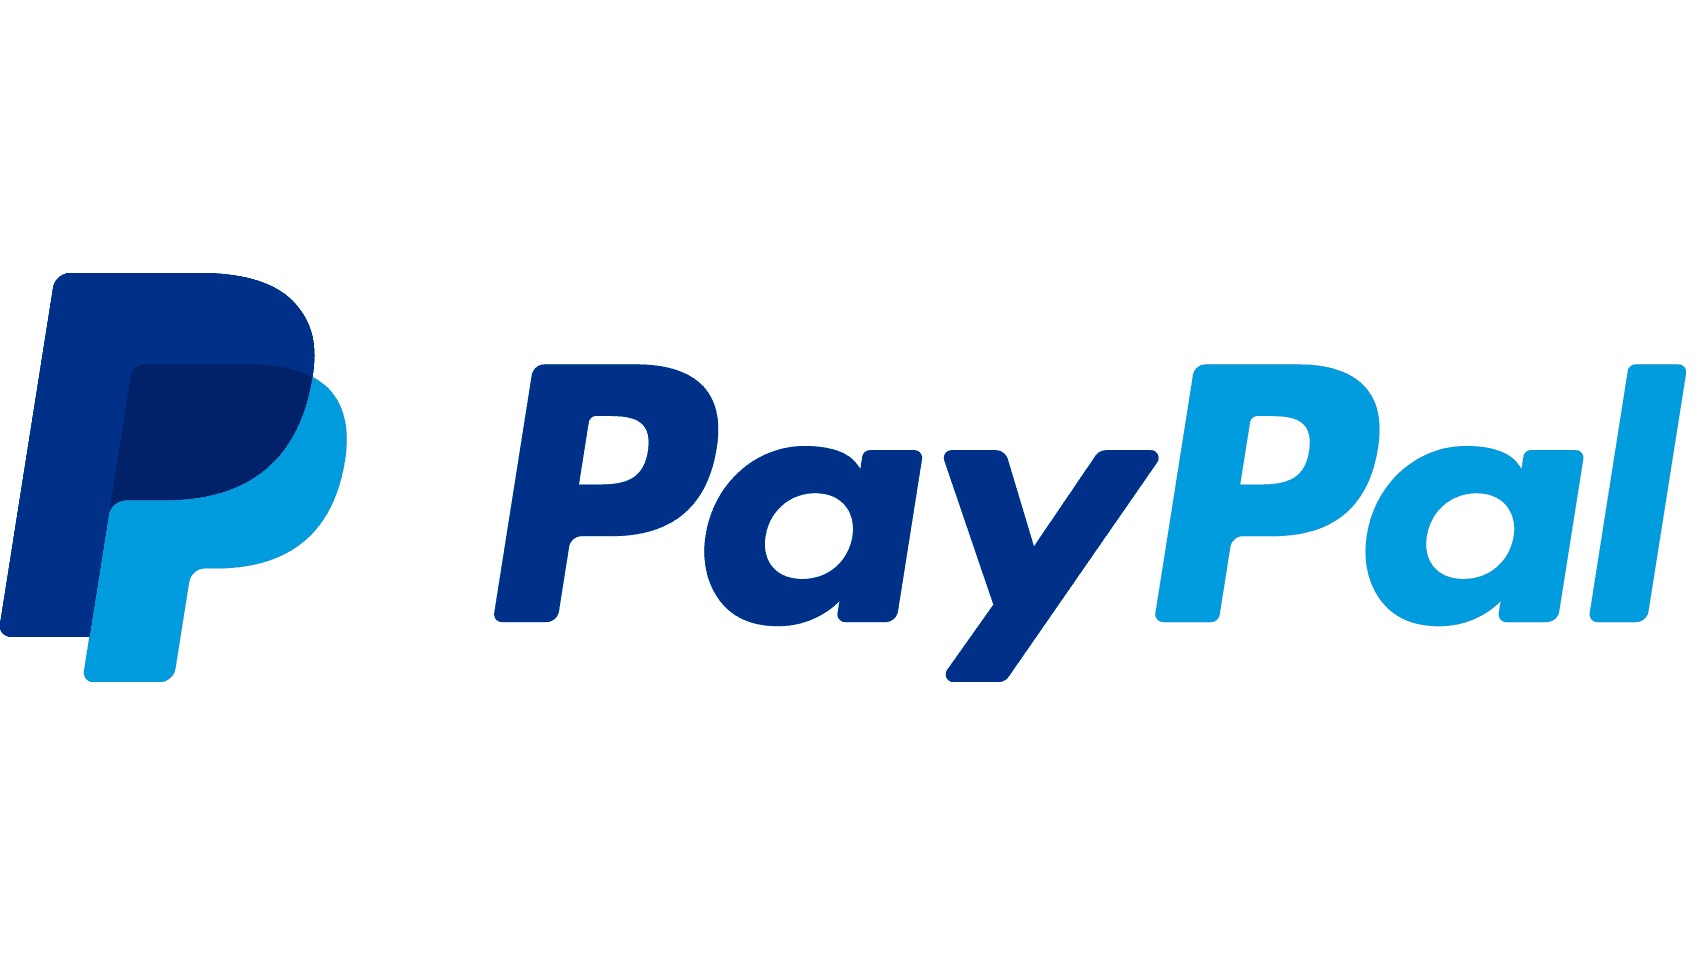 FREE $25 to Paypal!